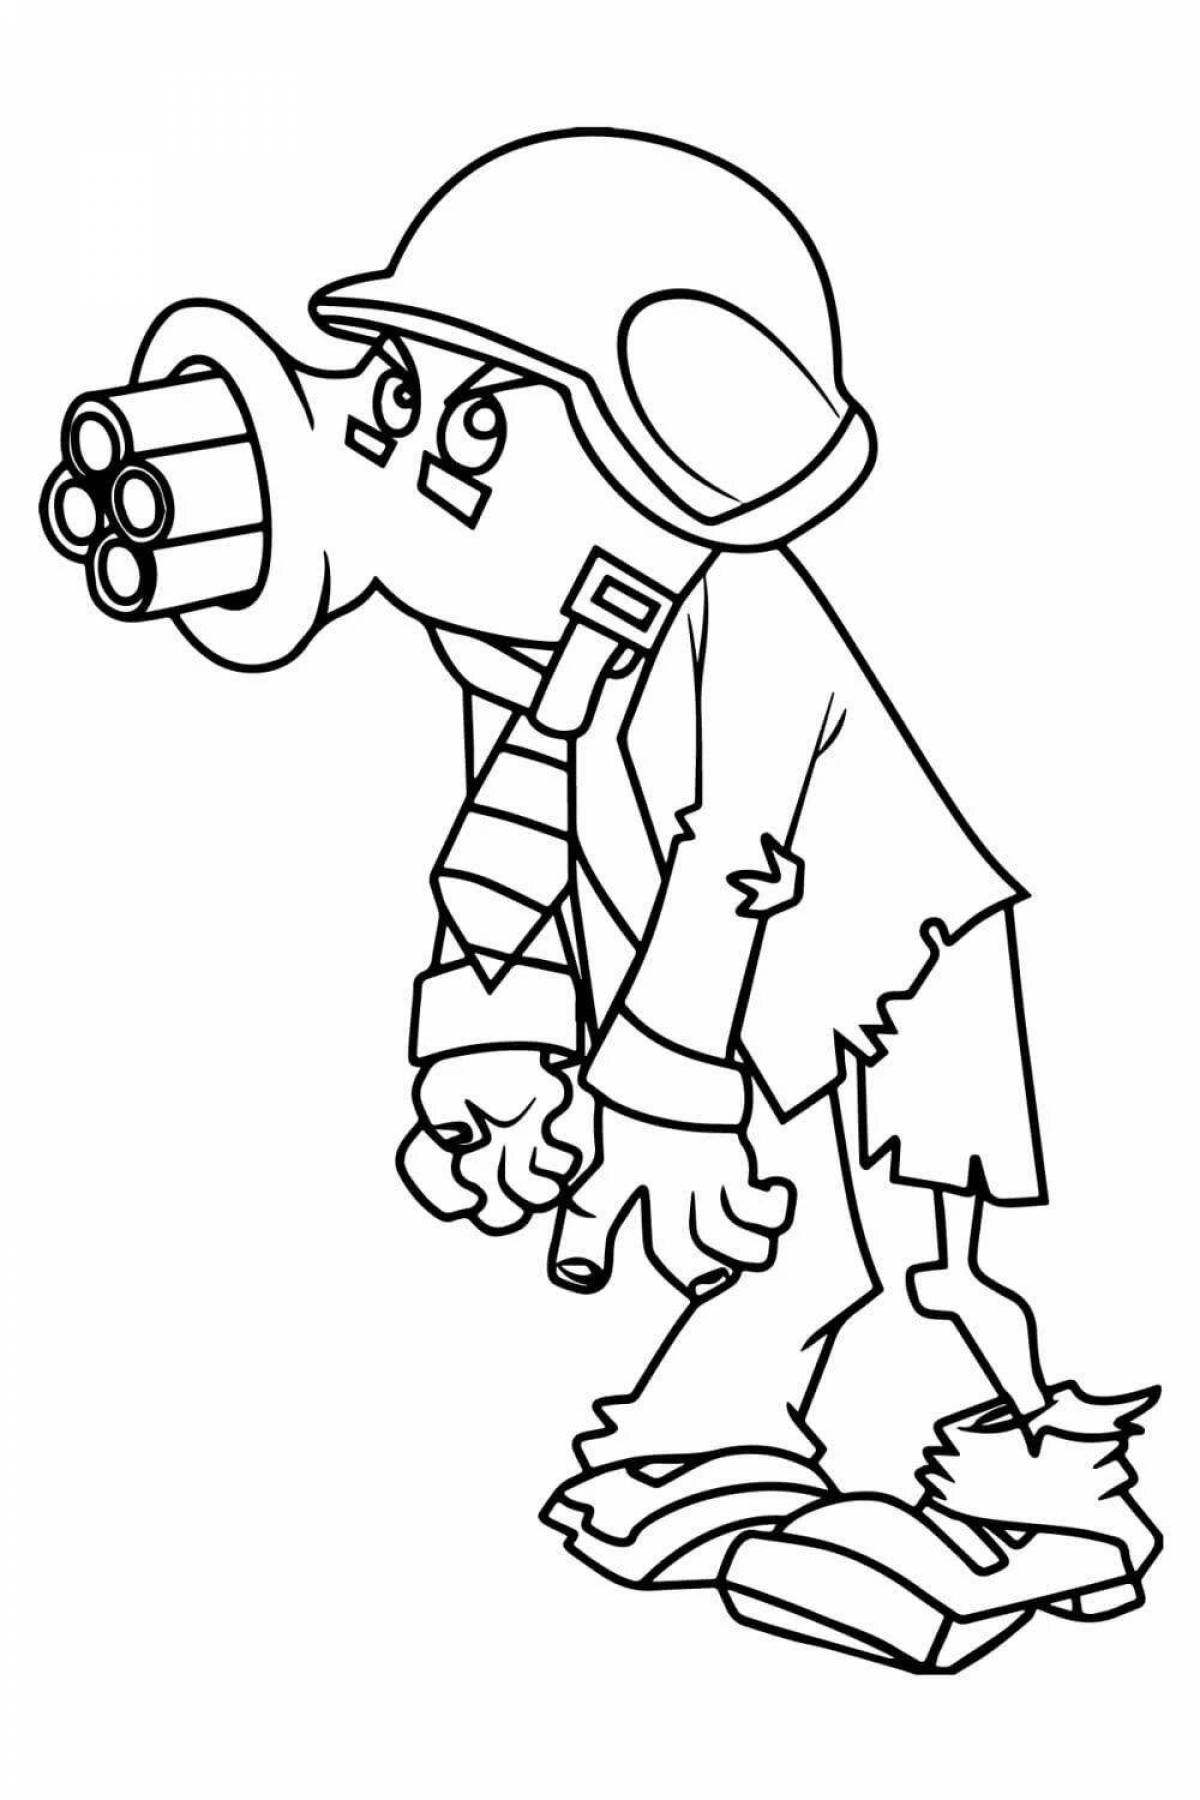 Horrible zombie coloring page